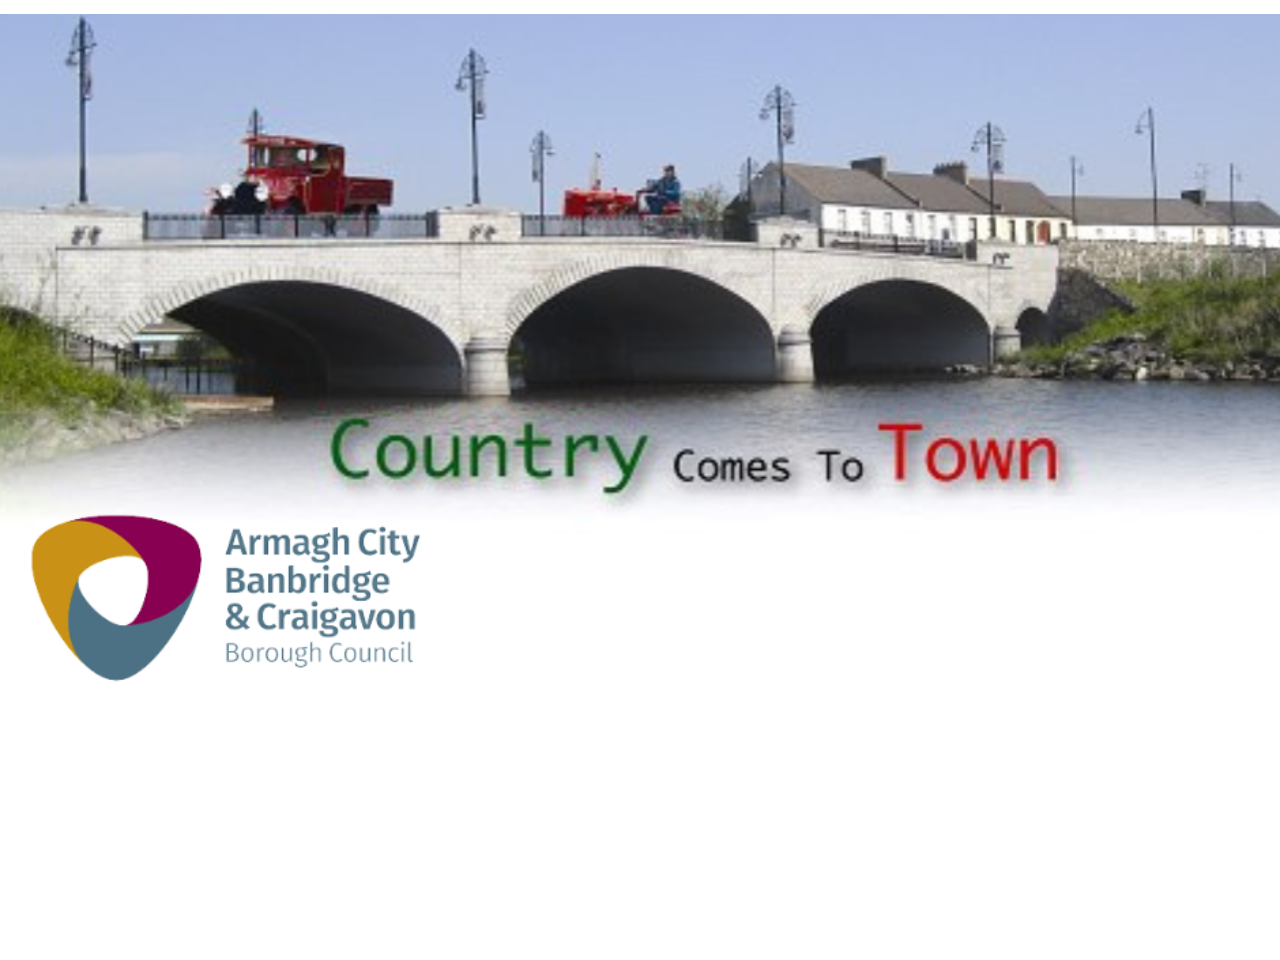 Portadown Credit Union does Country comes to Town